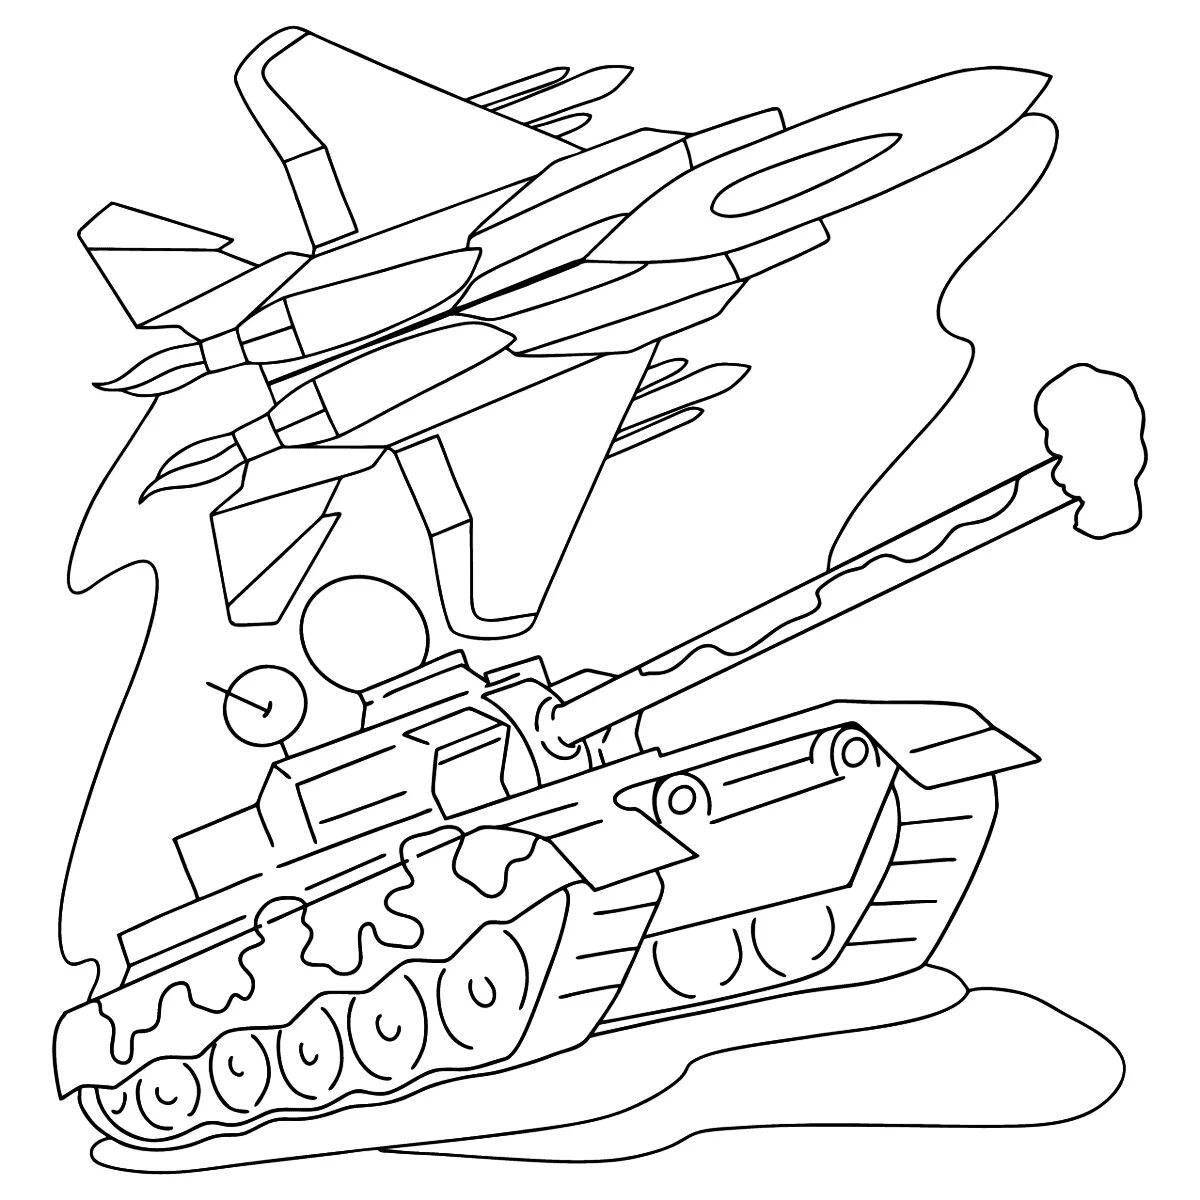 Glorious tanks and planes coloring pages for kids